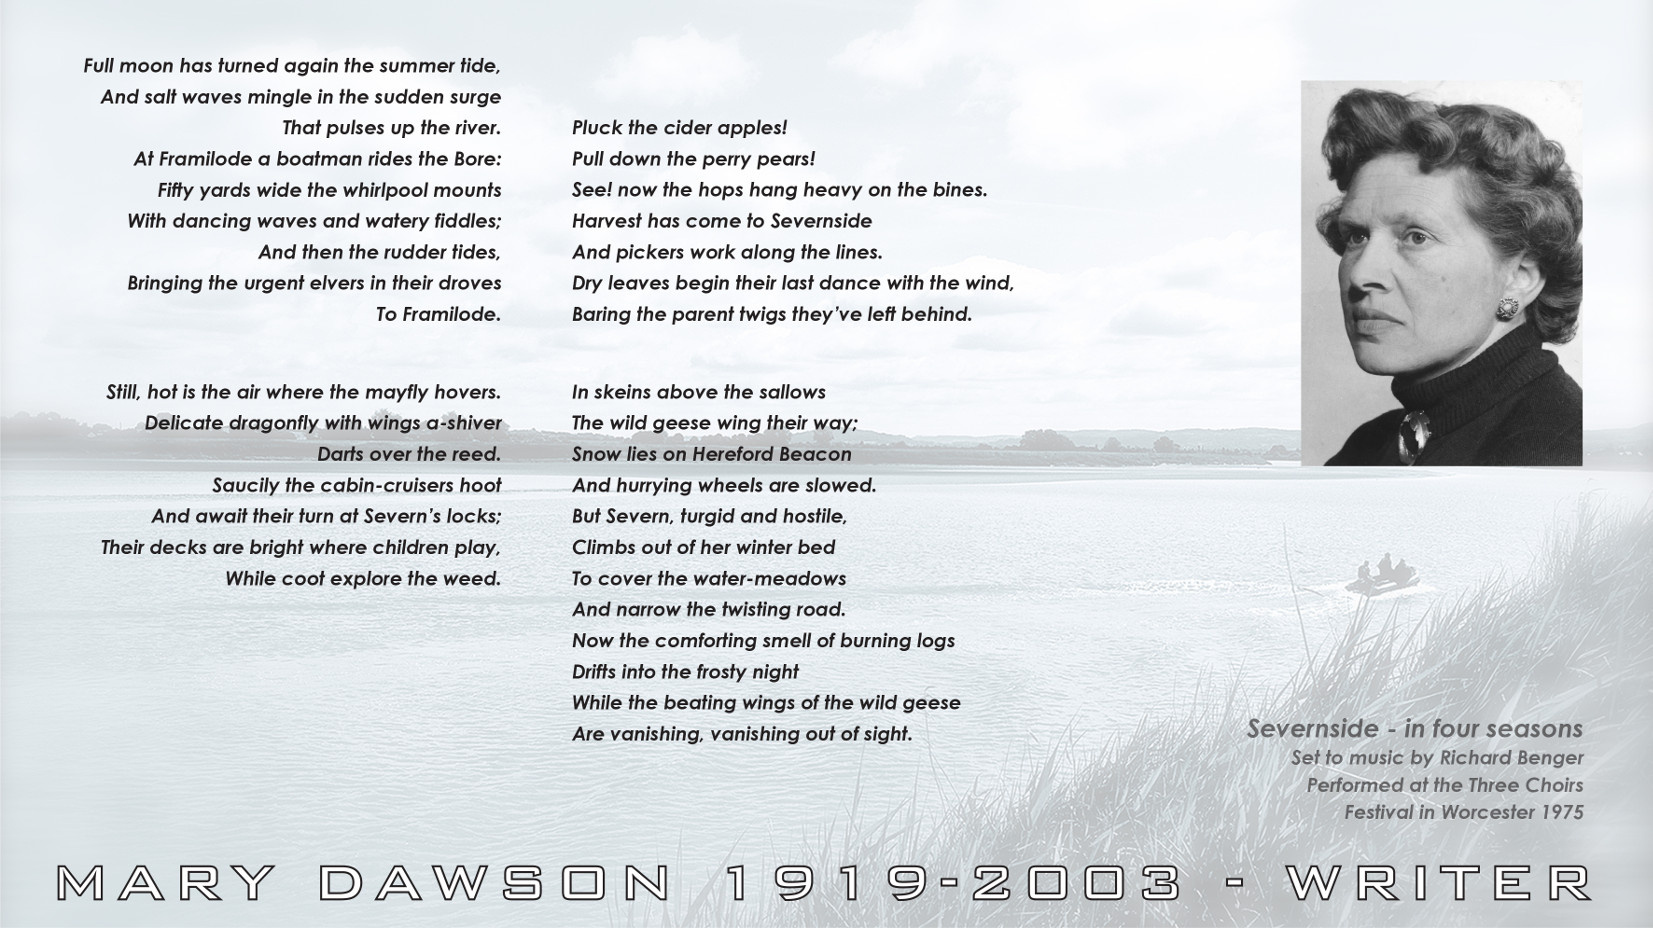 Severnside - In Four Seasons, Set to music by Richard Benger. Full moon has turned again the summer tide, And salt waves mingle in the sudden surge, That pulses up the river. Poem by Mary Dawson Jeffries UK.